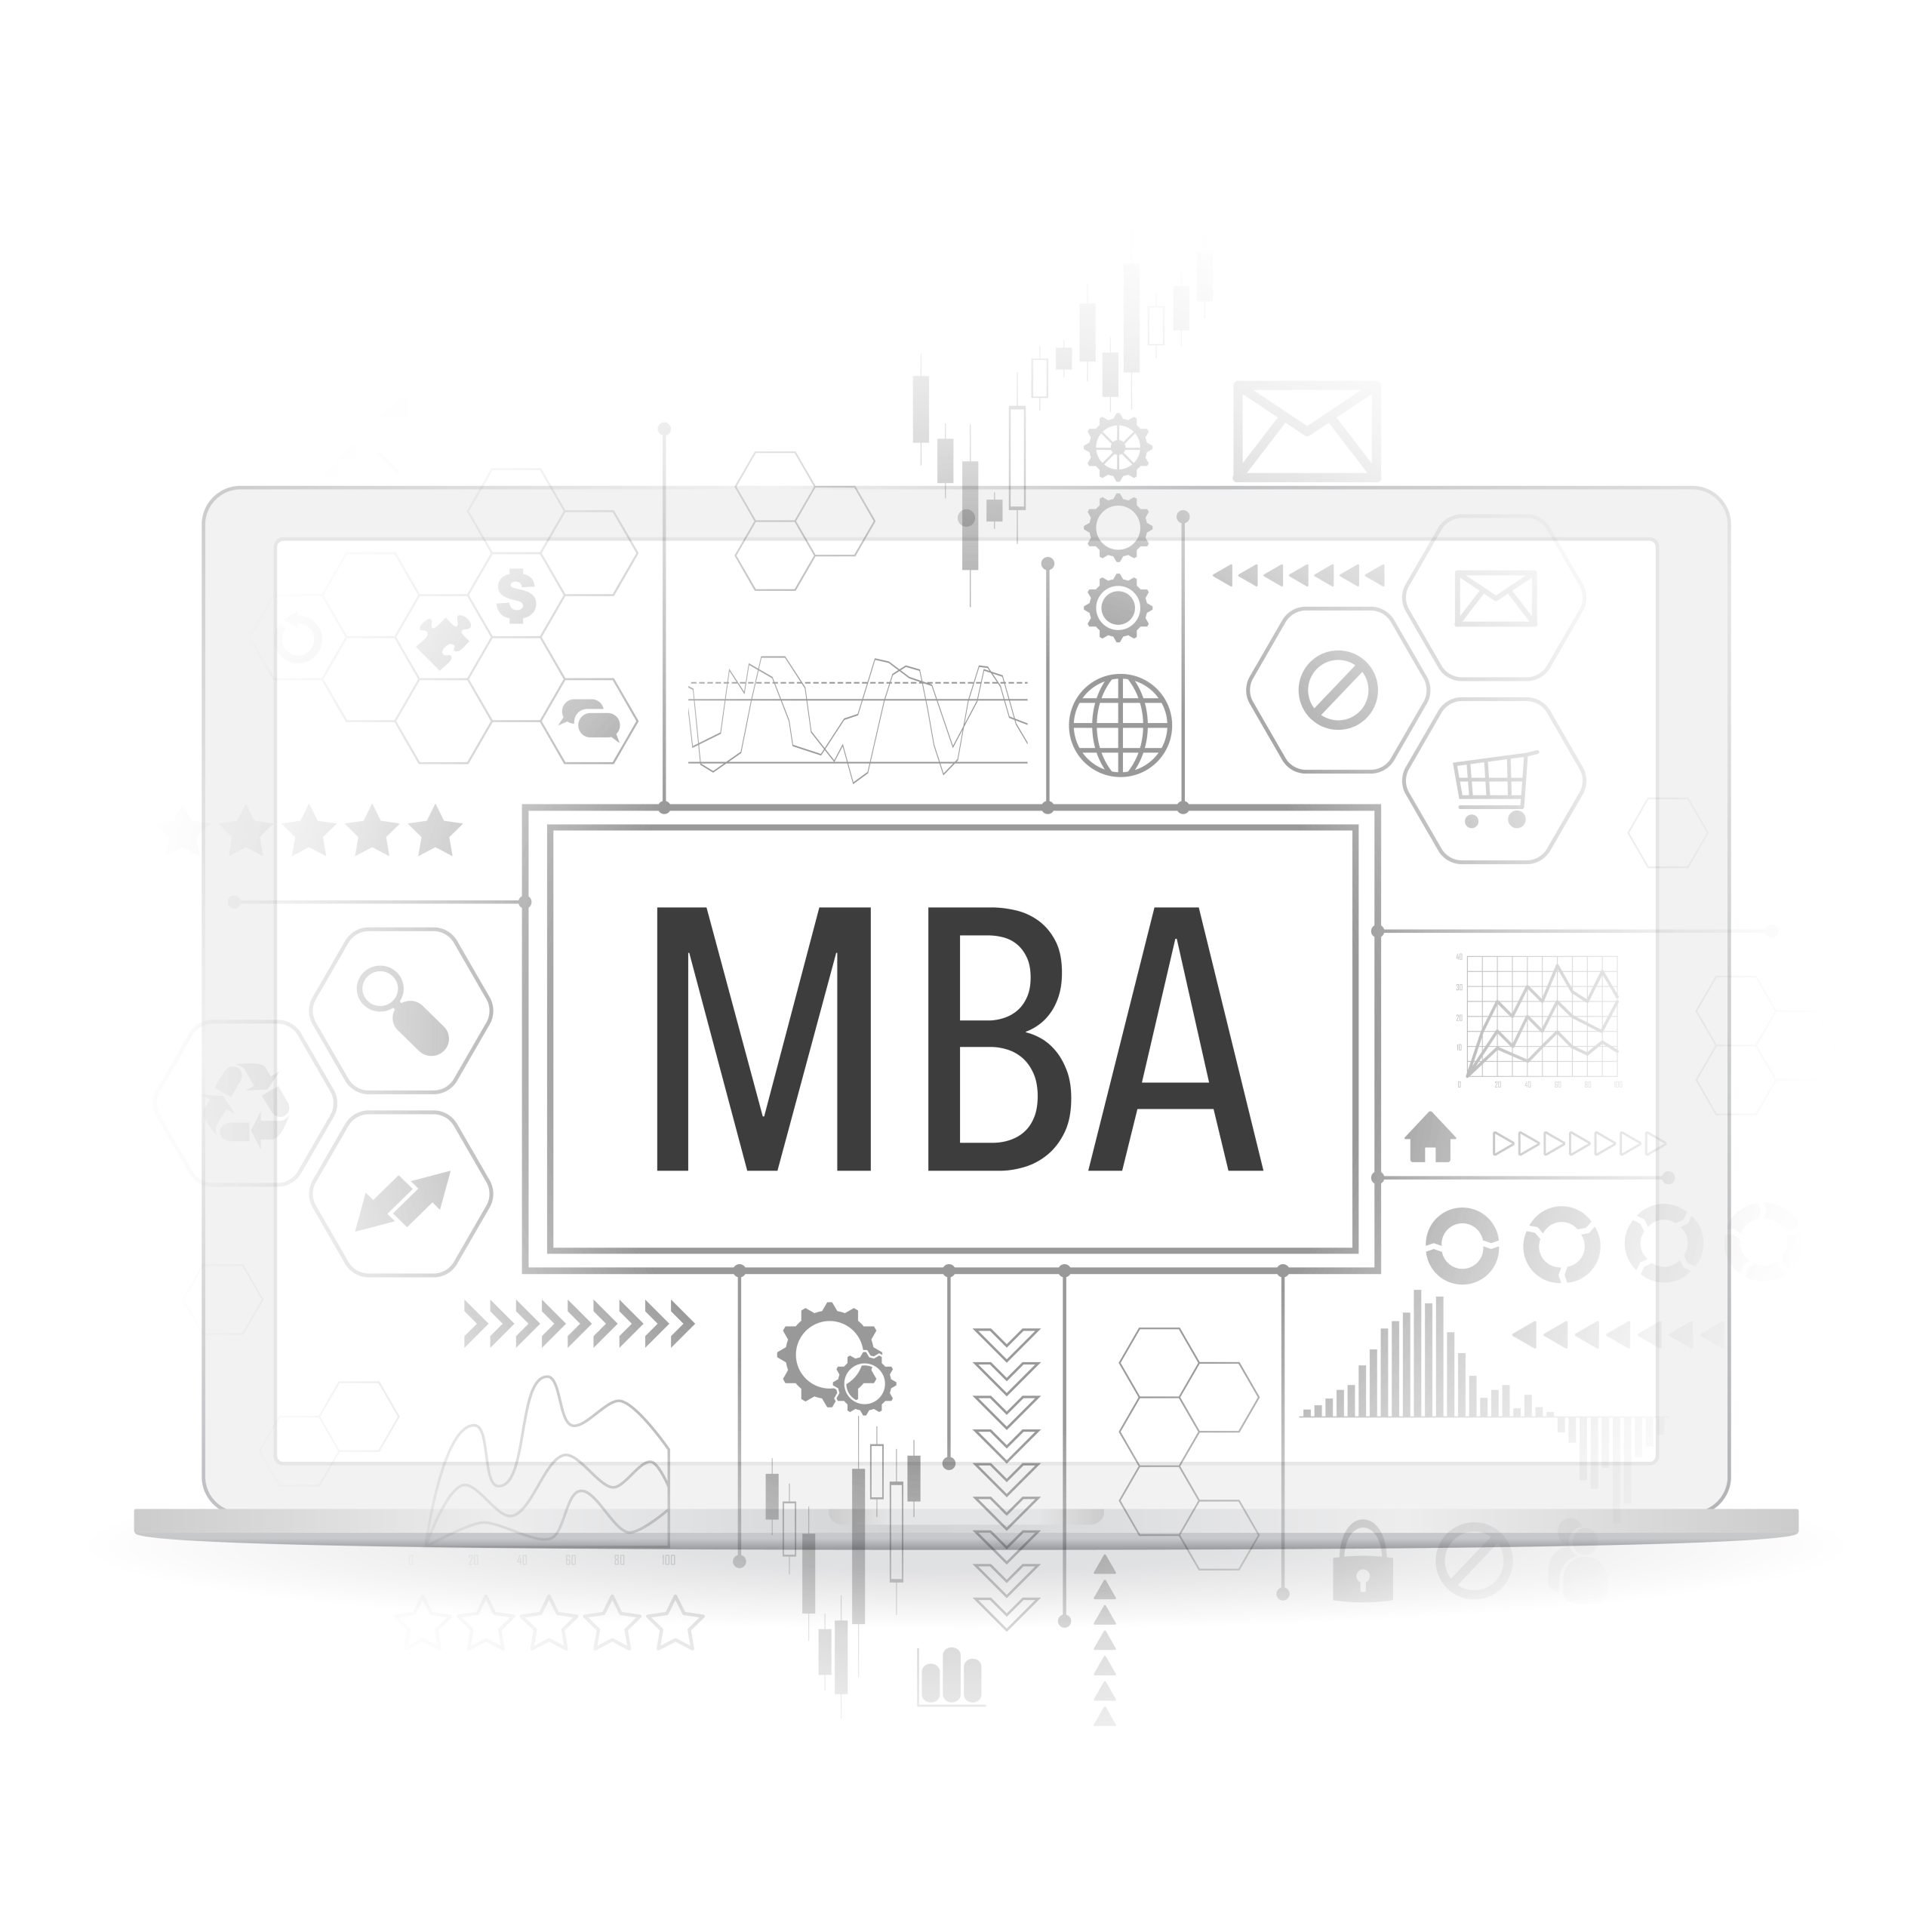 What is the future scope of MBA Digital Transformation in India?